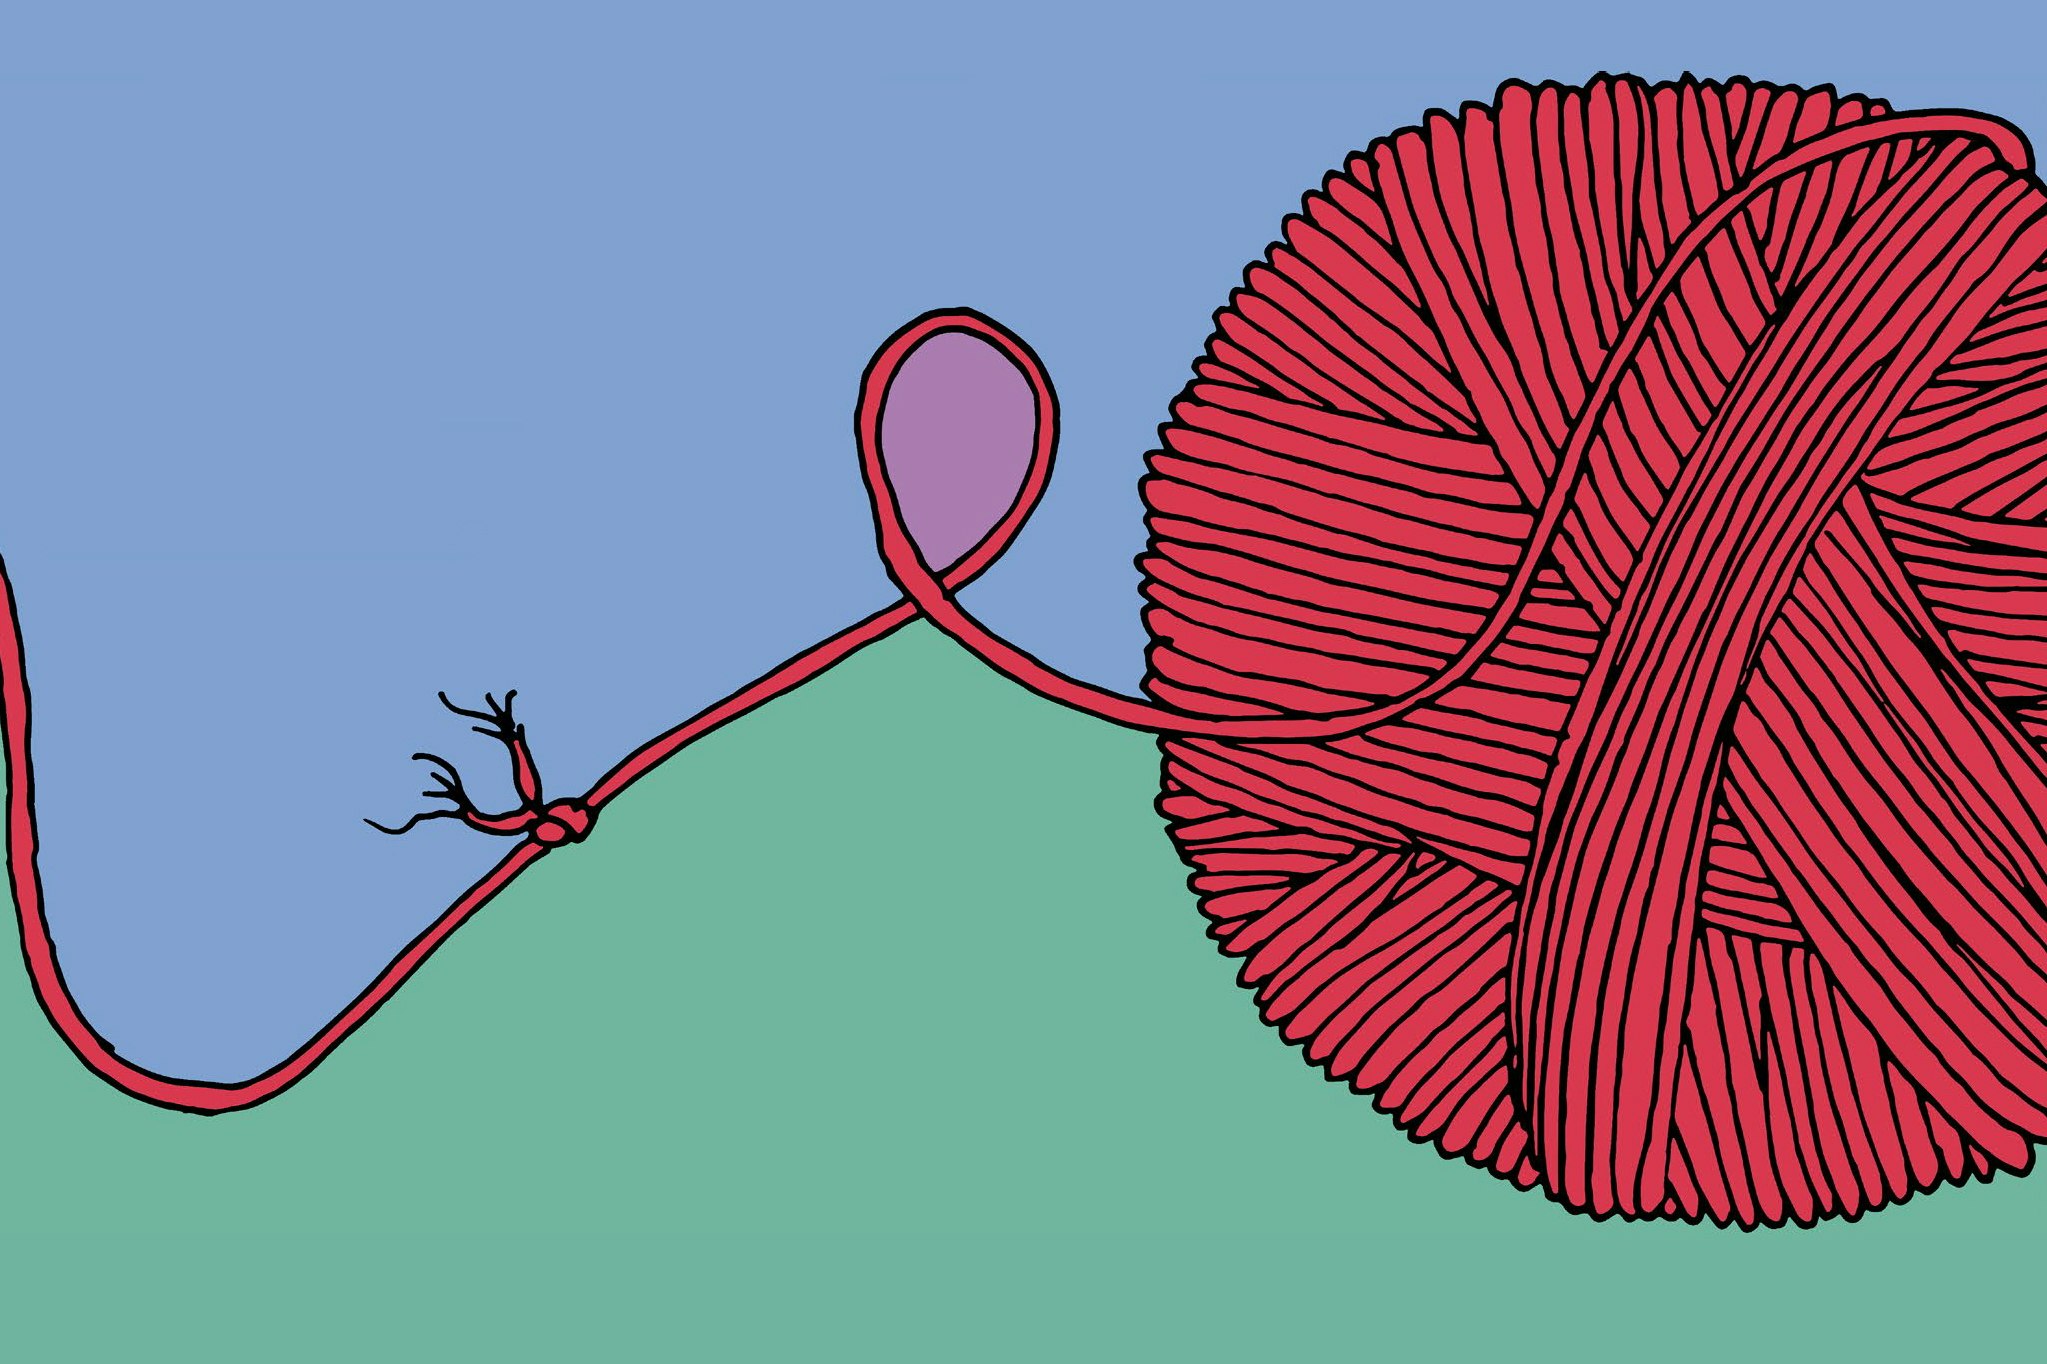 An illustration of a red ball of string on a blue and green background. Part of the string is tied in a not